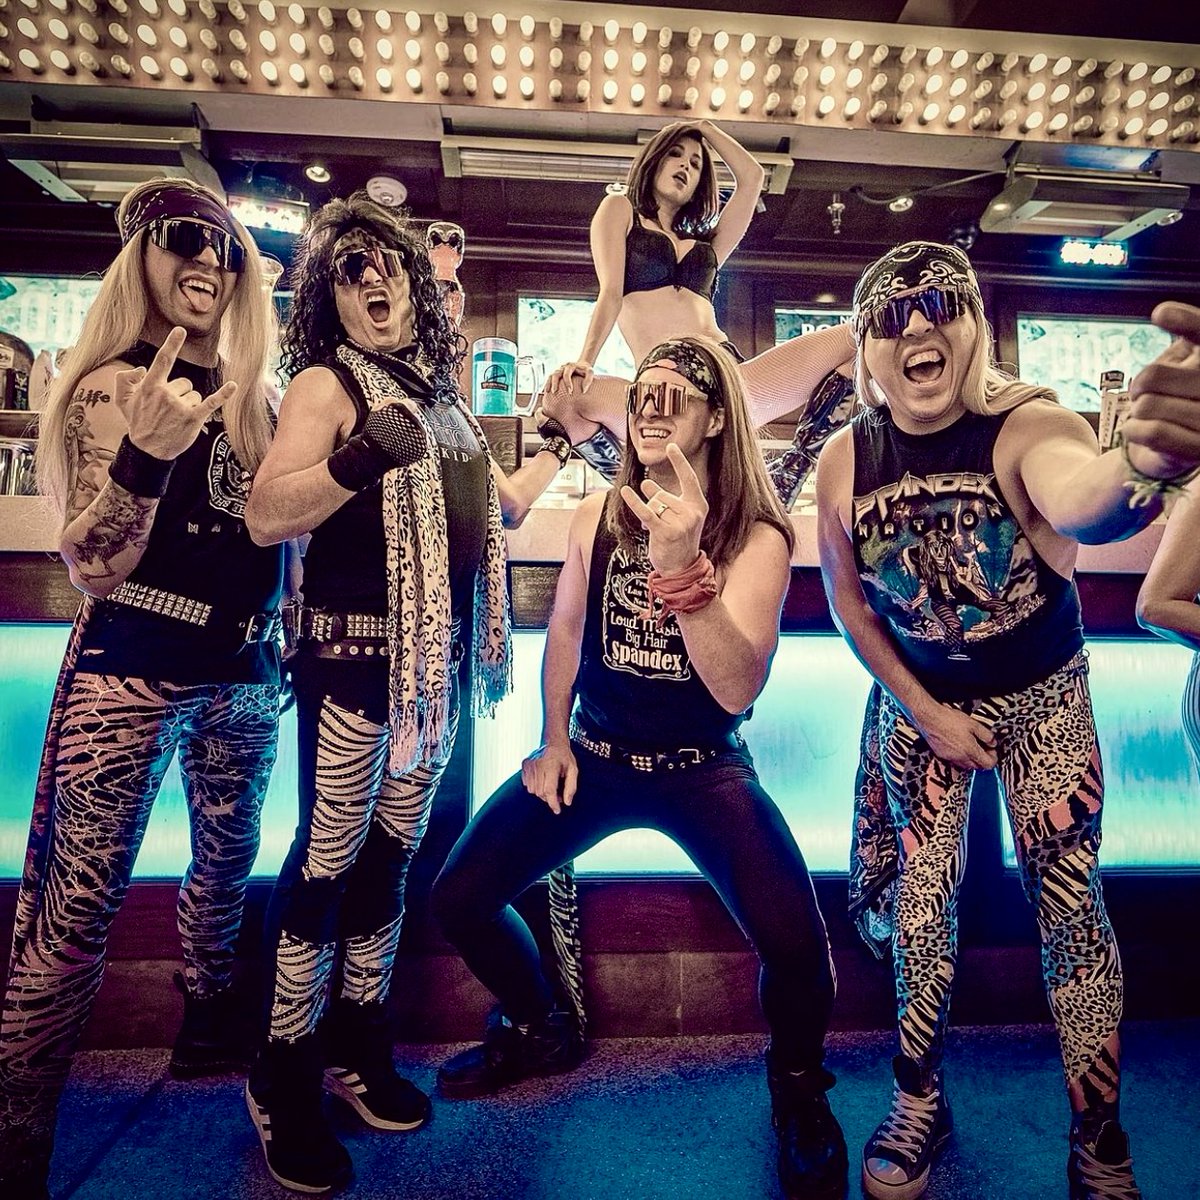 Saturday night at the #Vegas classic calls for a downtown party like no other! Our friends @SpandexNationLV take the Main St. Stage tonight from 10PM-2AM, and we hope you’re ready to rock! 🤘 #GoldenGateVegas ✨